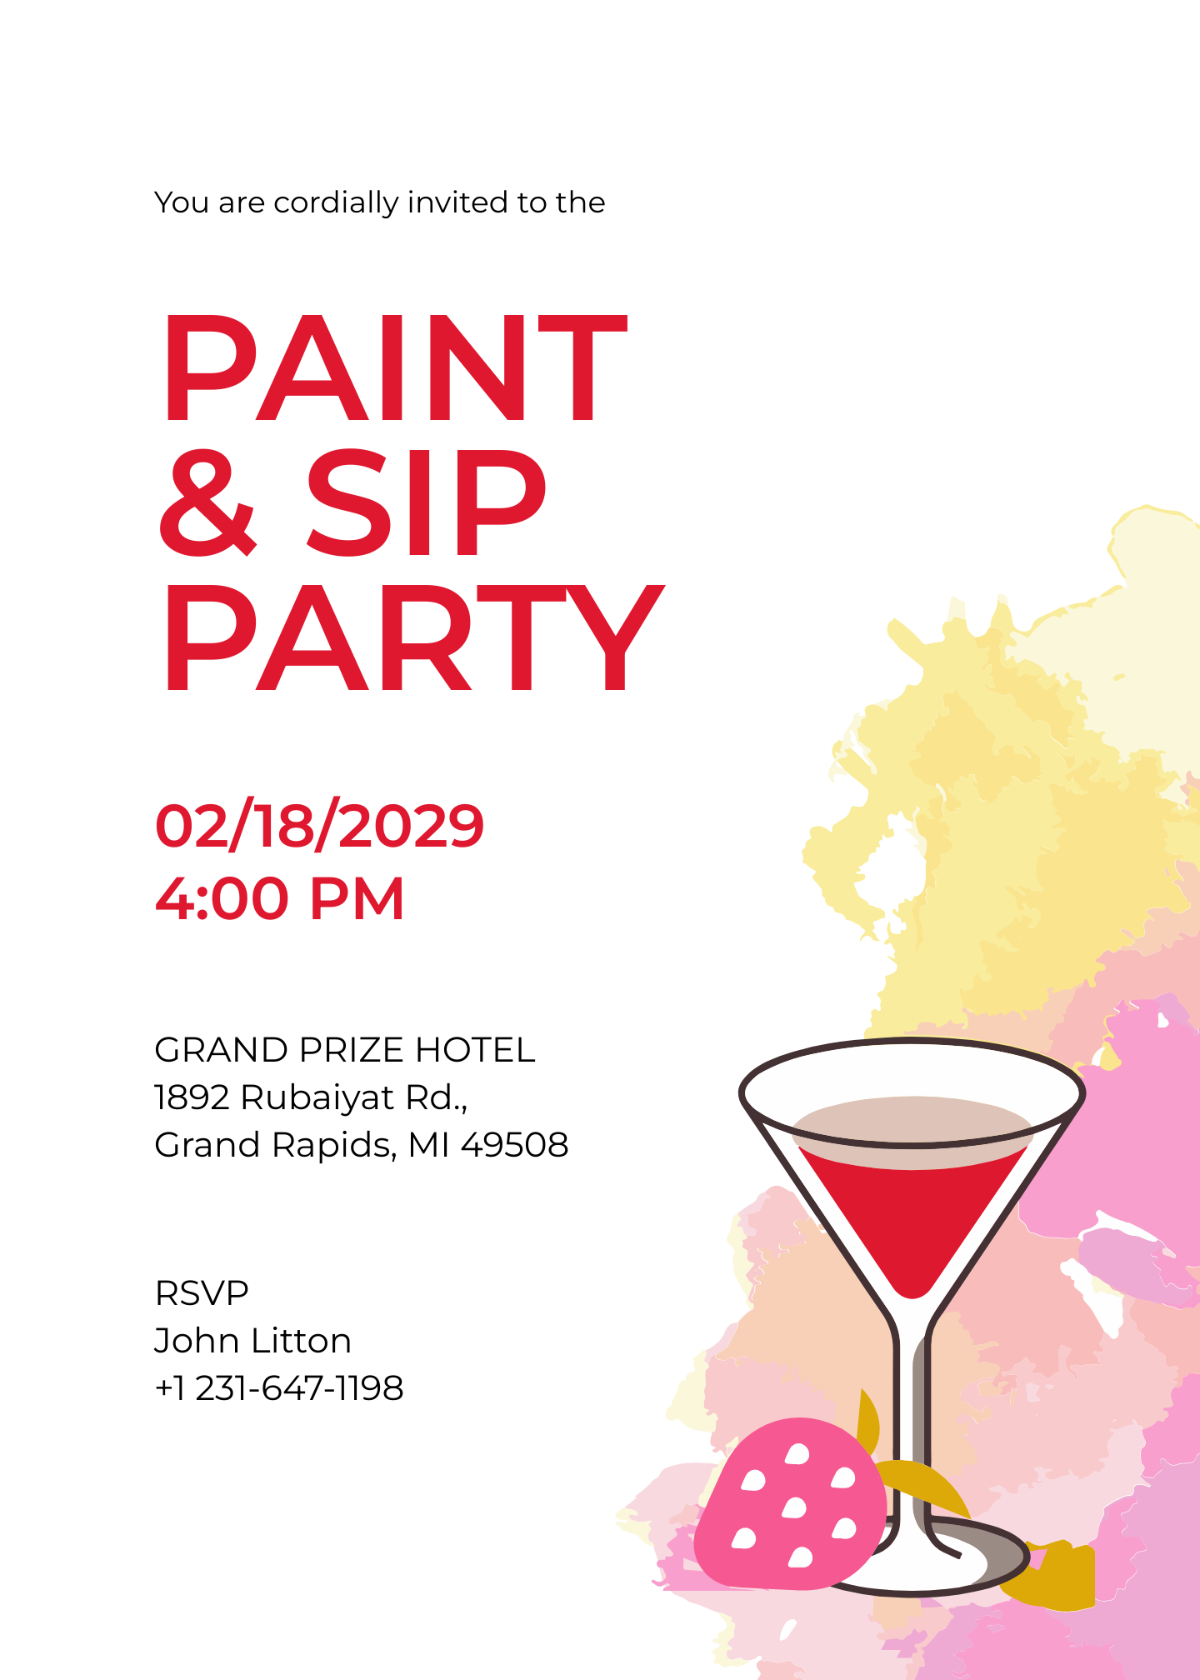 Paint and Sip Party Invitation Template